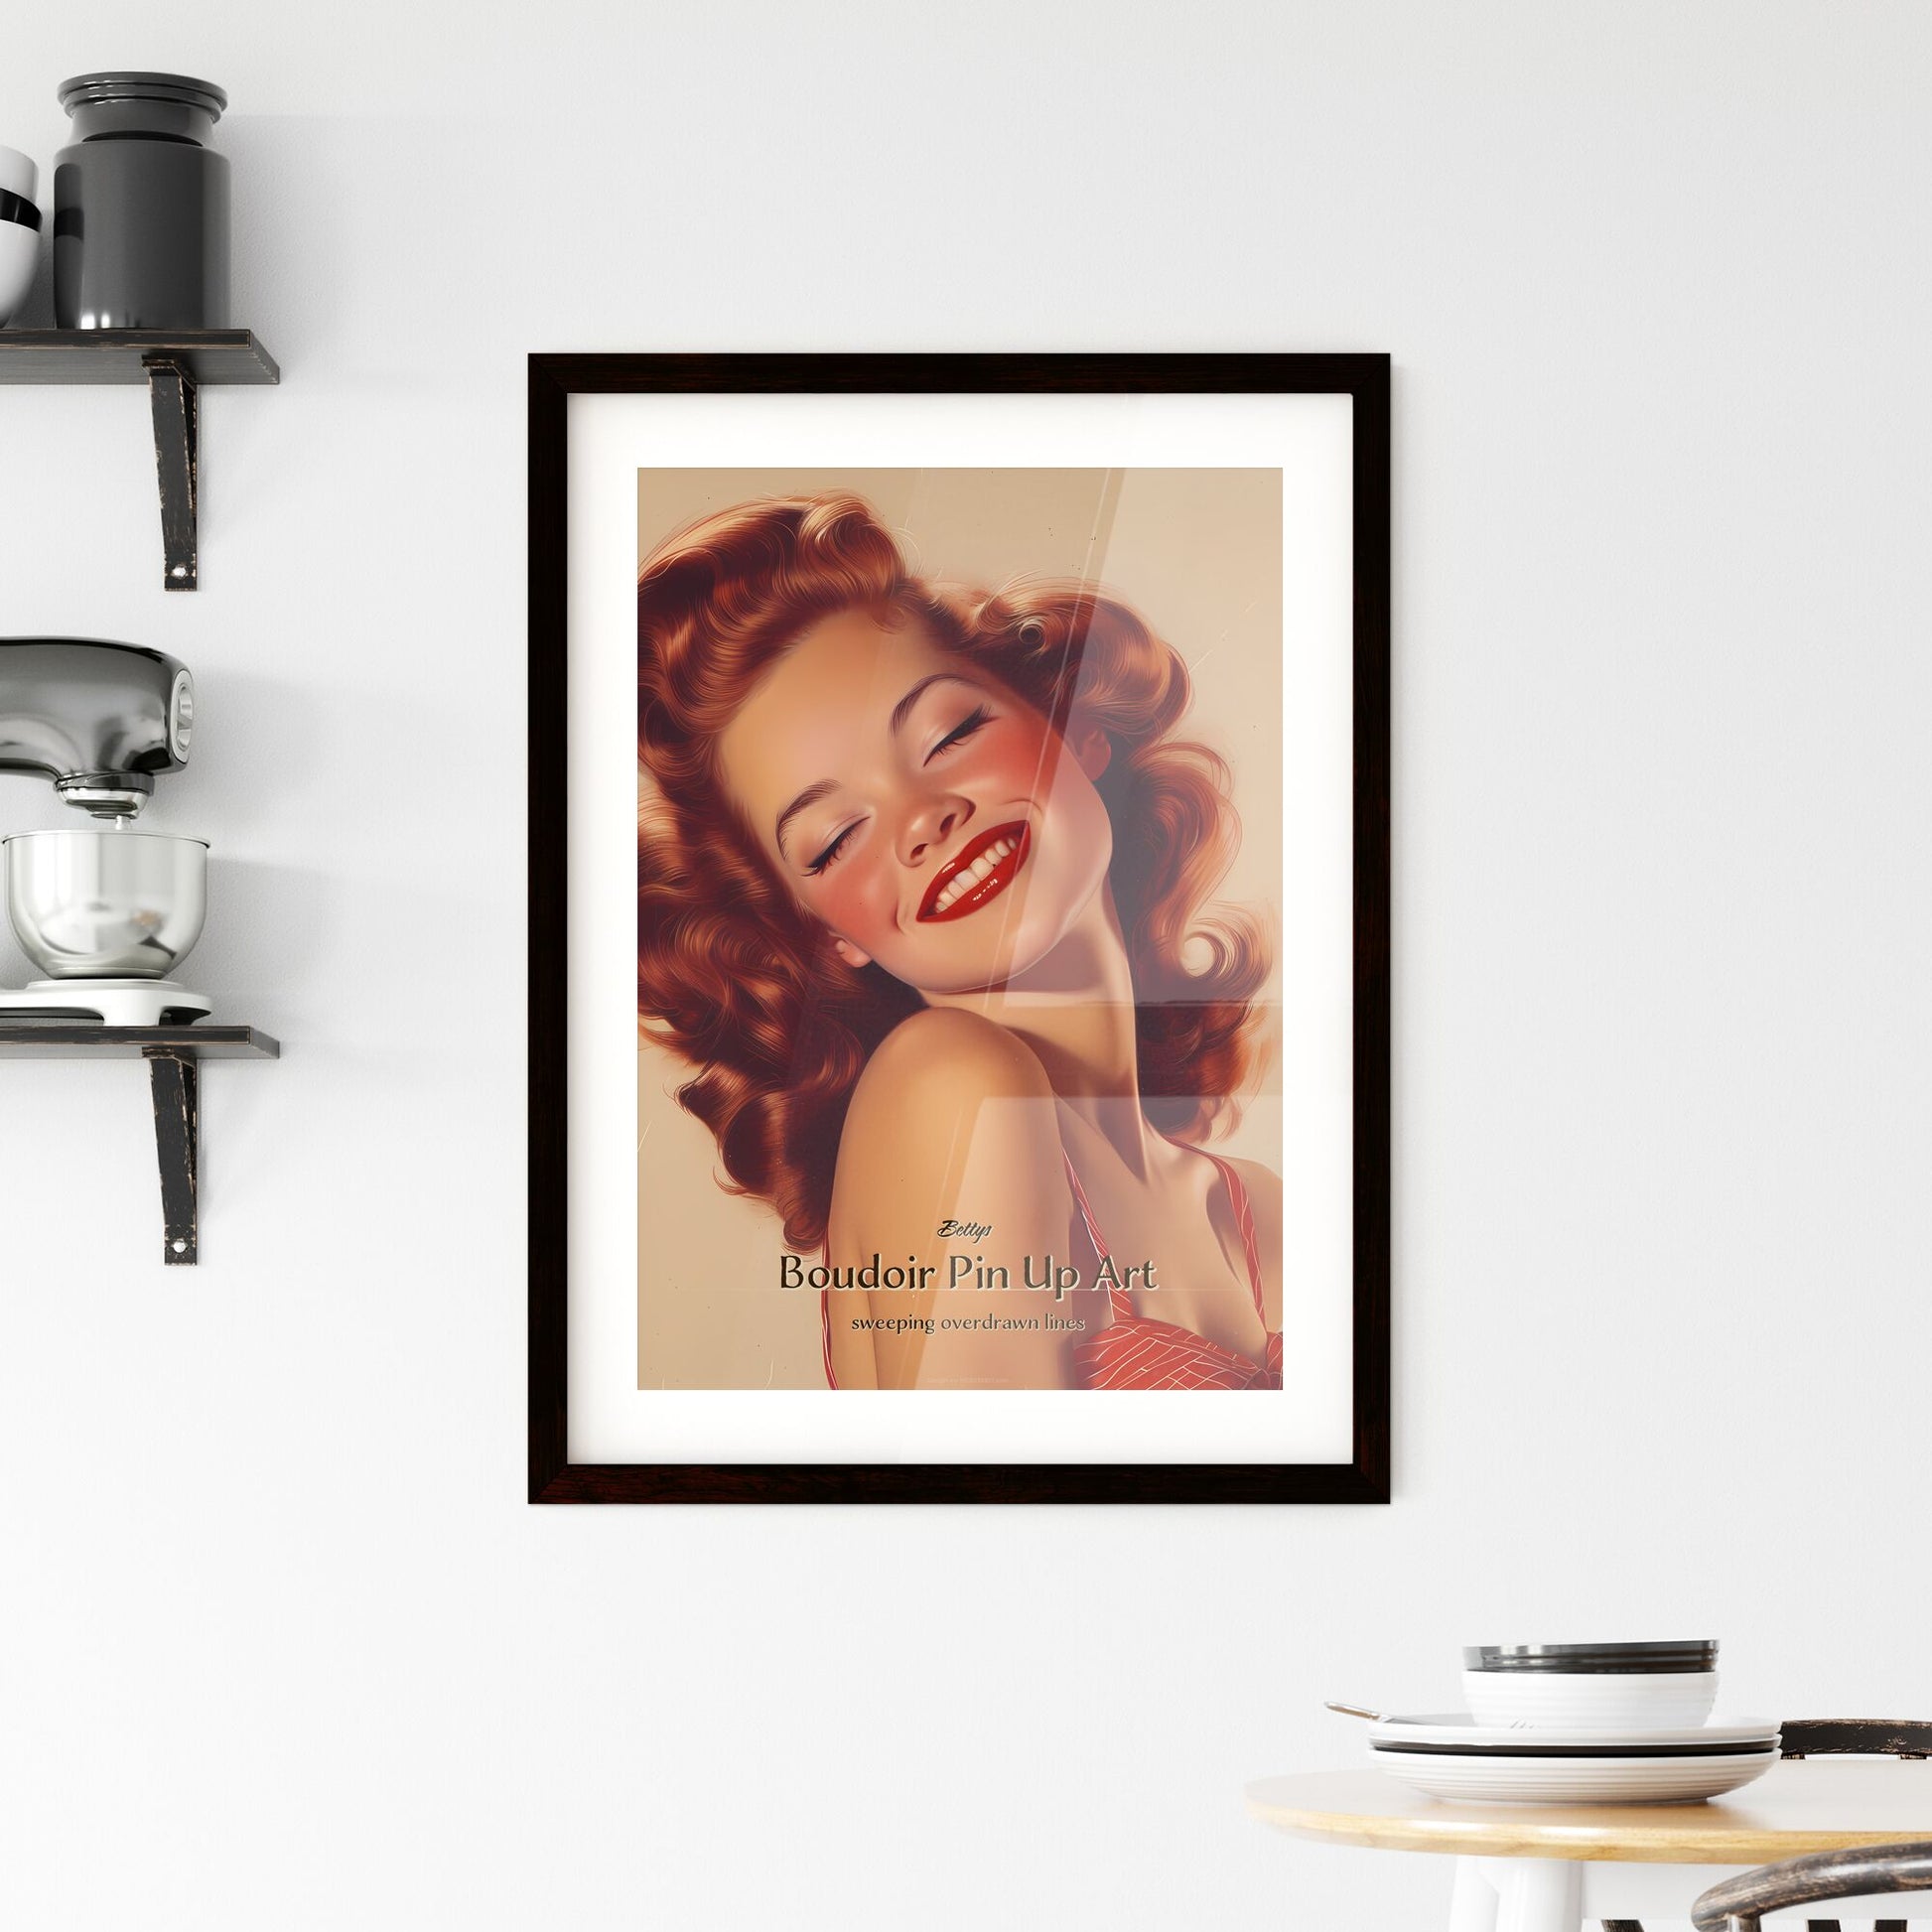 Bettys, Boudoir Pin Up Art, sweeping overdrawn lines, A Poster of a woman with red hair and red lipstick smiling Default Title